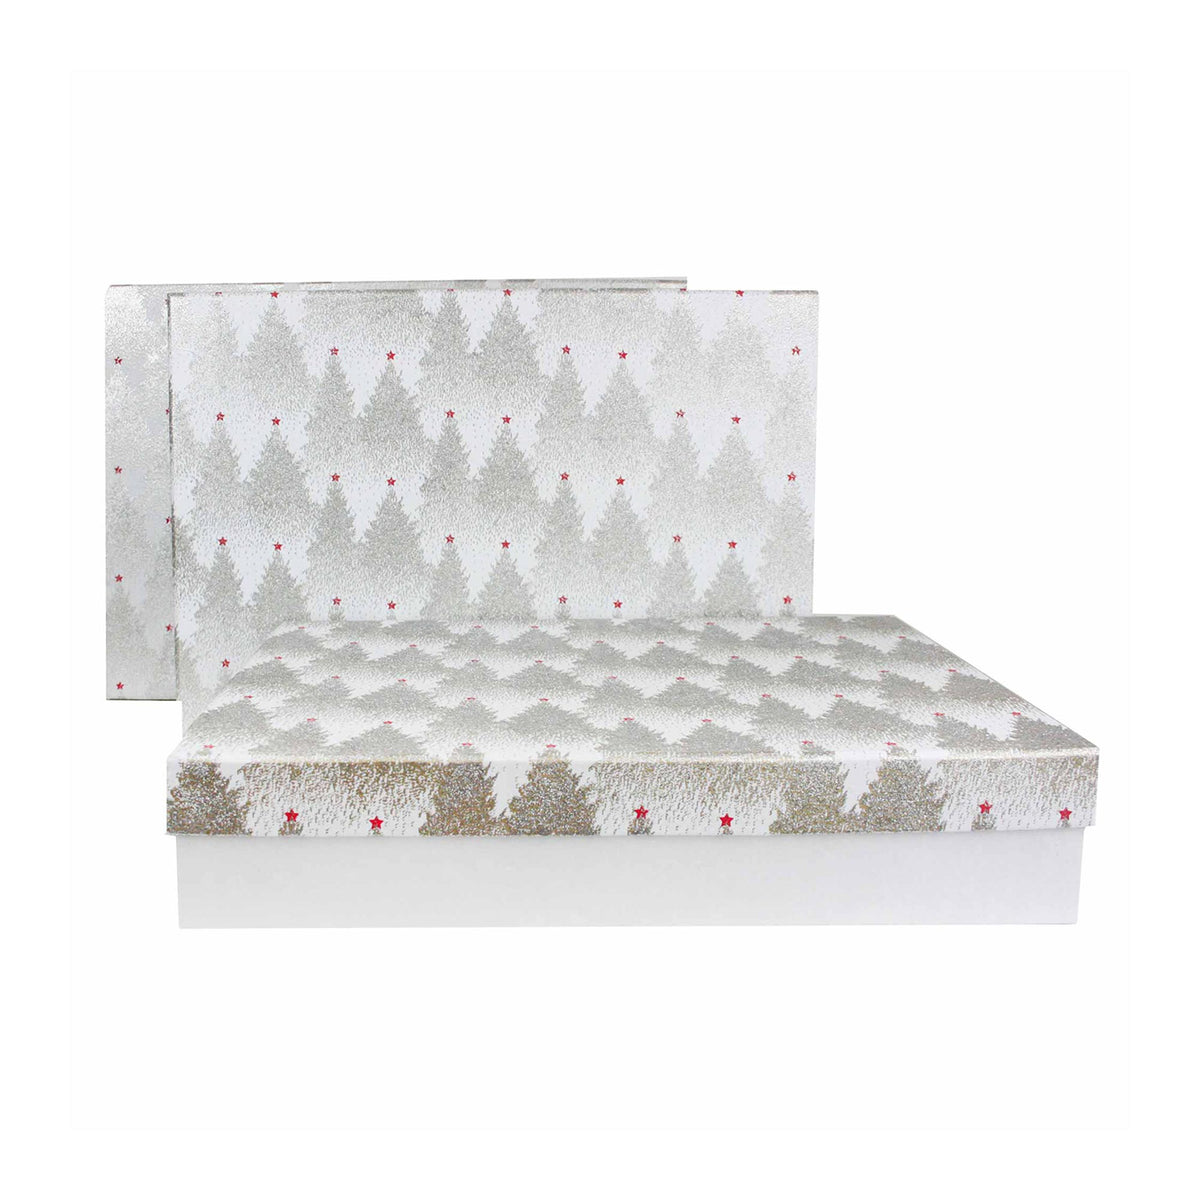 Handcrafted Glittery Winter Wonderland Gift Boxes - Set of 3 (Sizes Available)